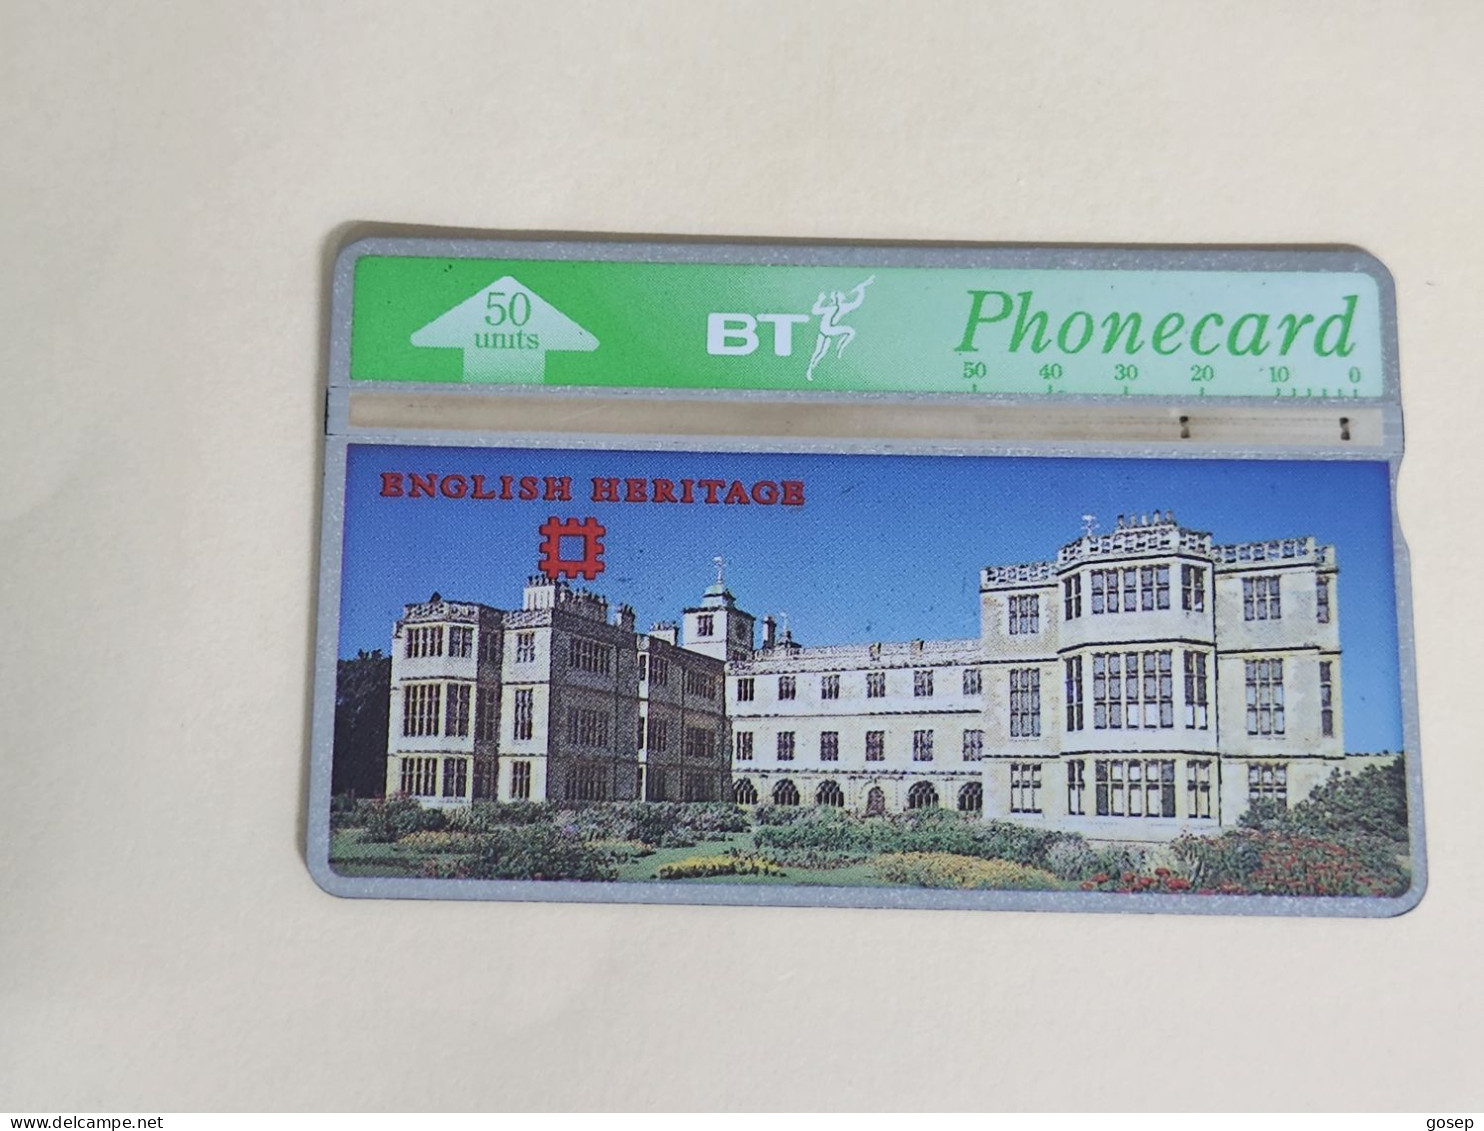 United Kingdom-(BTA103)-HERITAGE-audley End House-(164)(50units)(547C79583)-price Cataloge3.00£-used+1card Prepiad Free - BT Advertising Issues